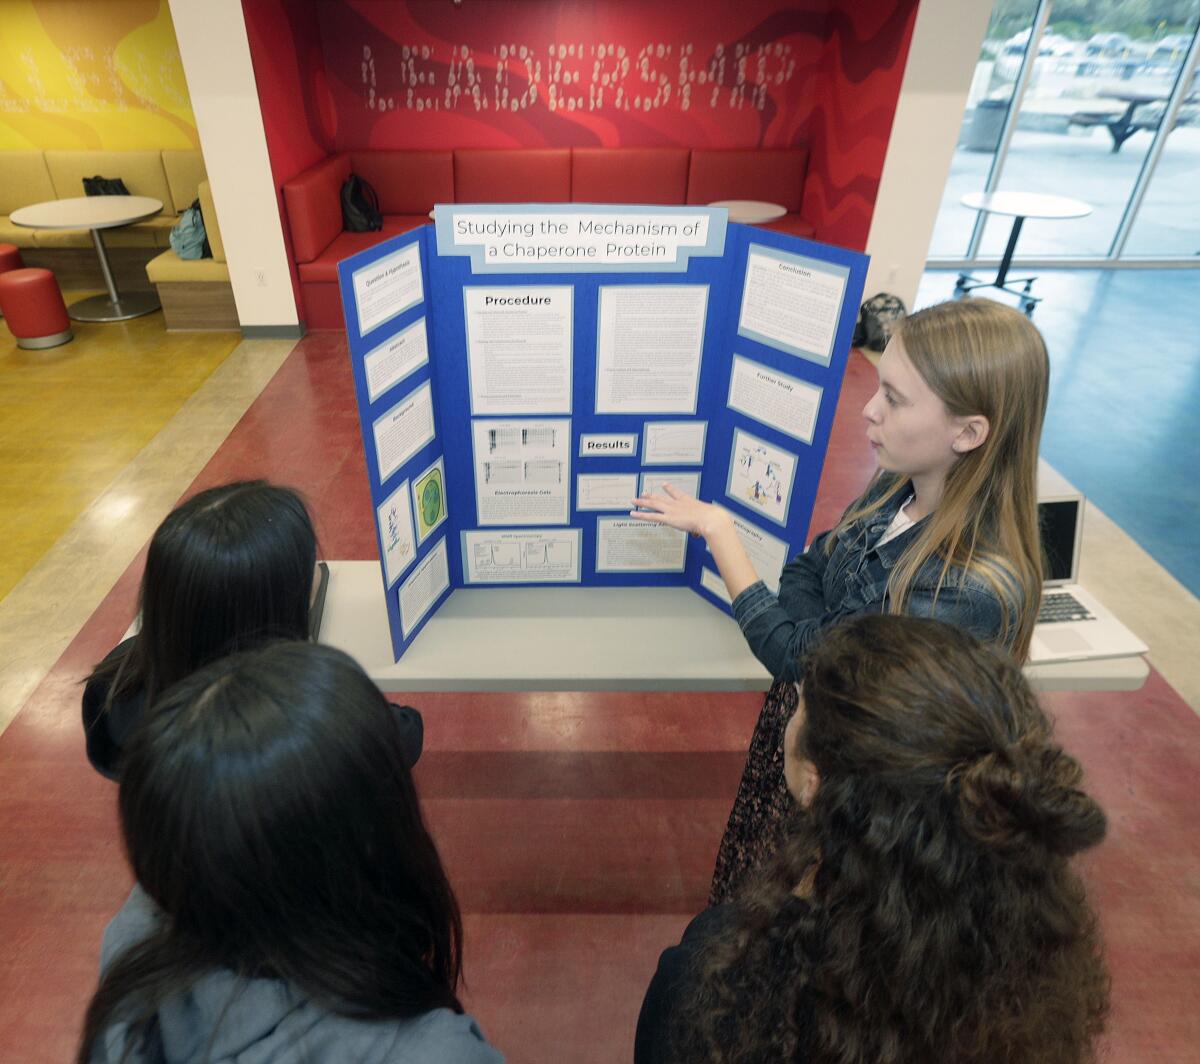 Jordan Lay, right, discusses her work with science partner Artis Phillips (on left in front), "Studying the Mechanism of Chaperone Protein" Friday at the LCHS annual science fair. The team placed second.